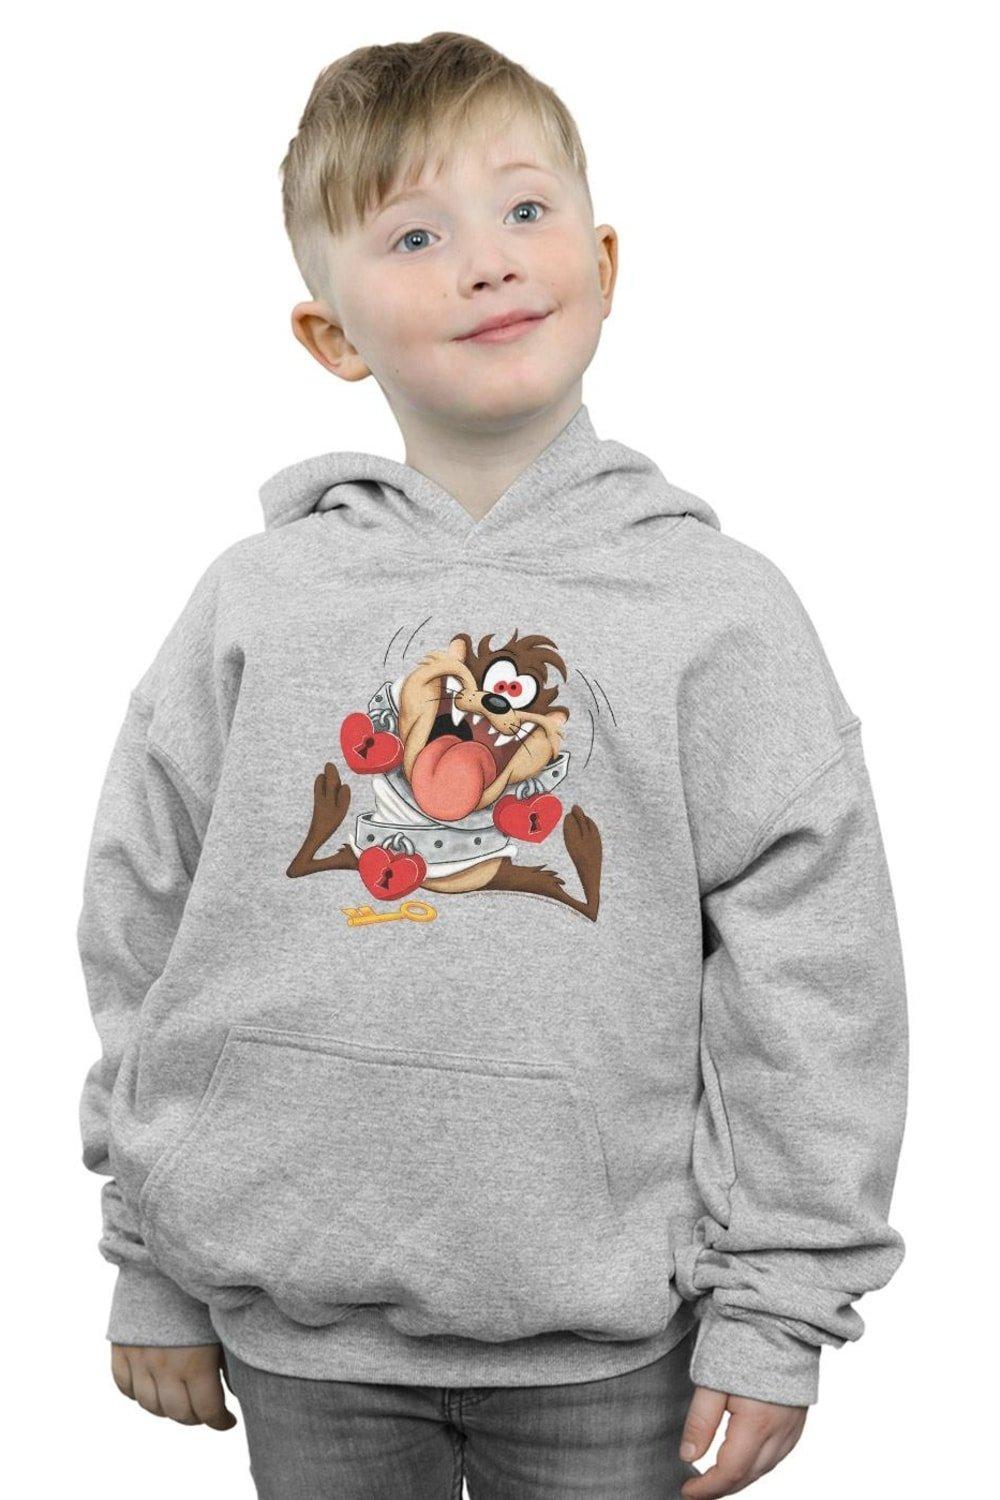 Taz Valentine’s Day Madly In Love Hoodie